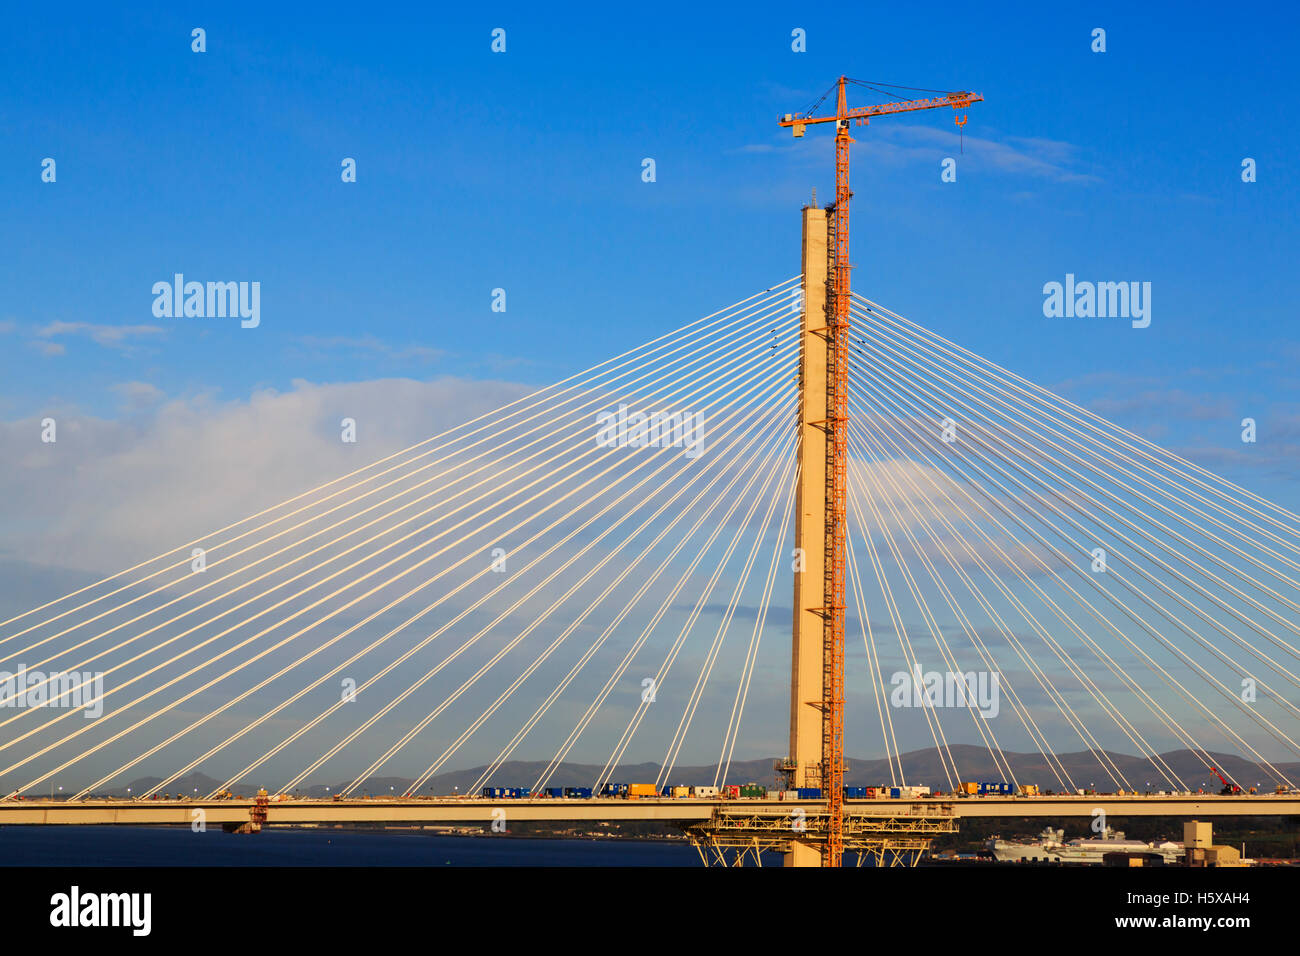 Construction work on the new Firth of Forth Queensferry Crossing road bridge. Edinburgh, Scotland Stock Photo